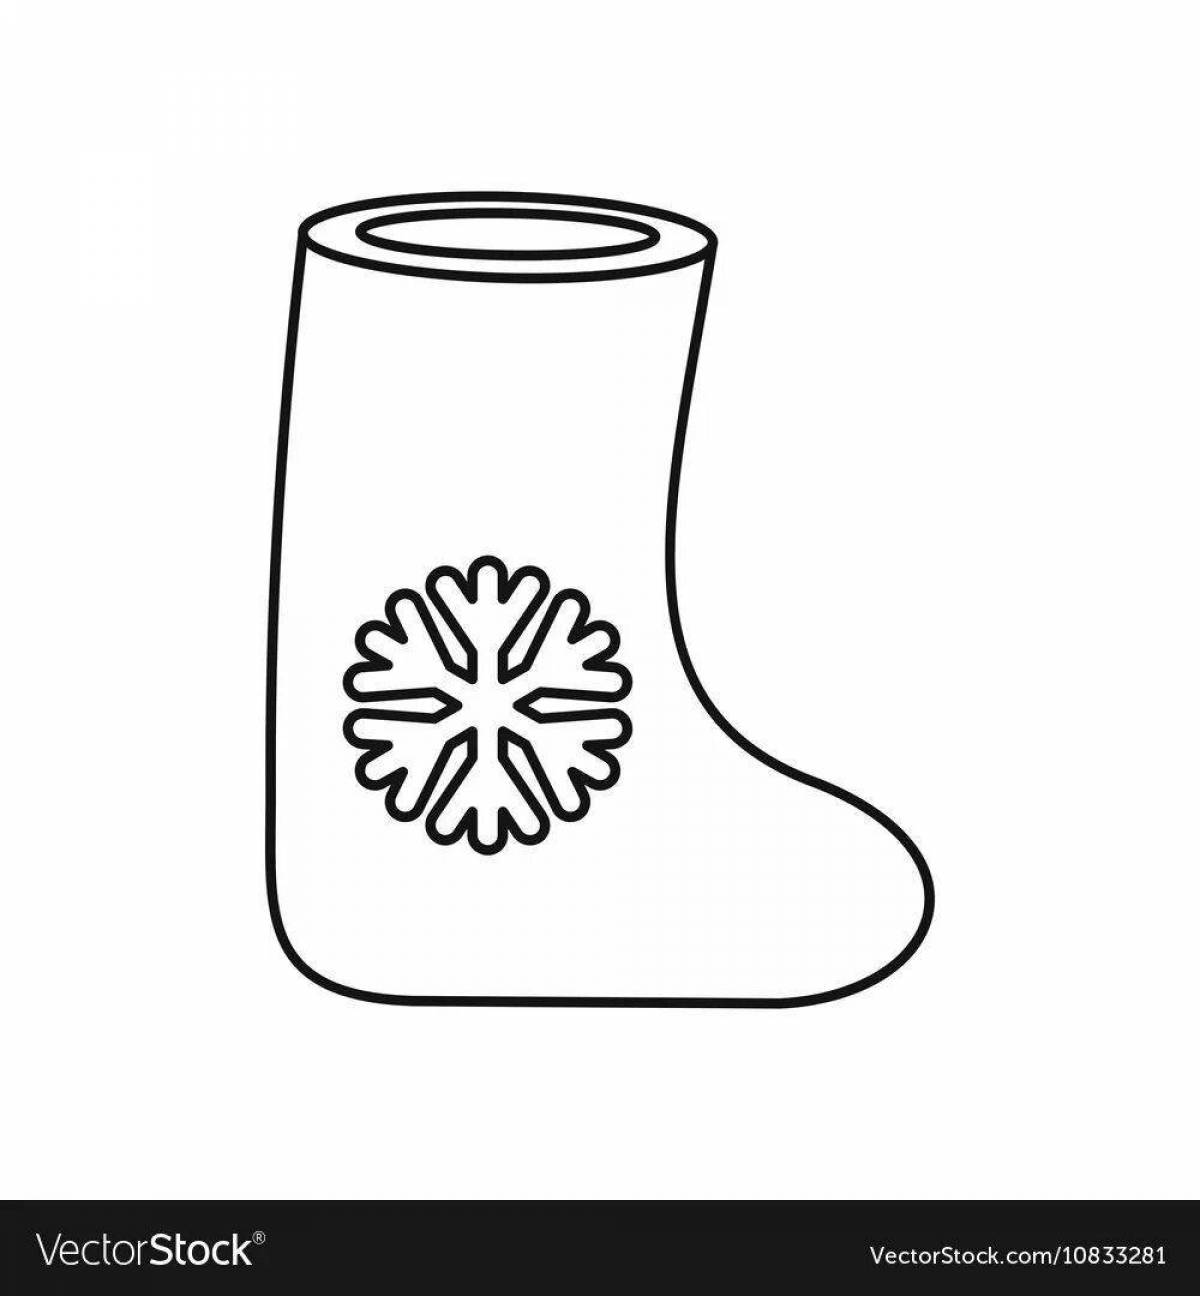 Coloring page humorous boots pattern